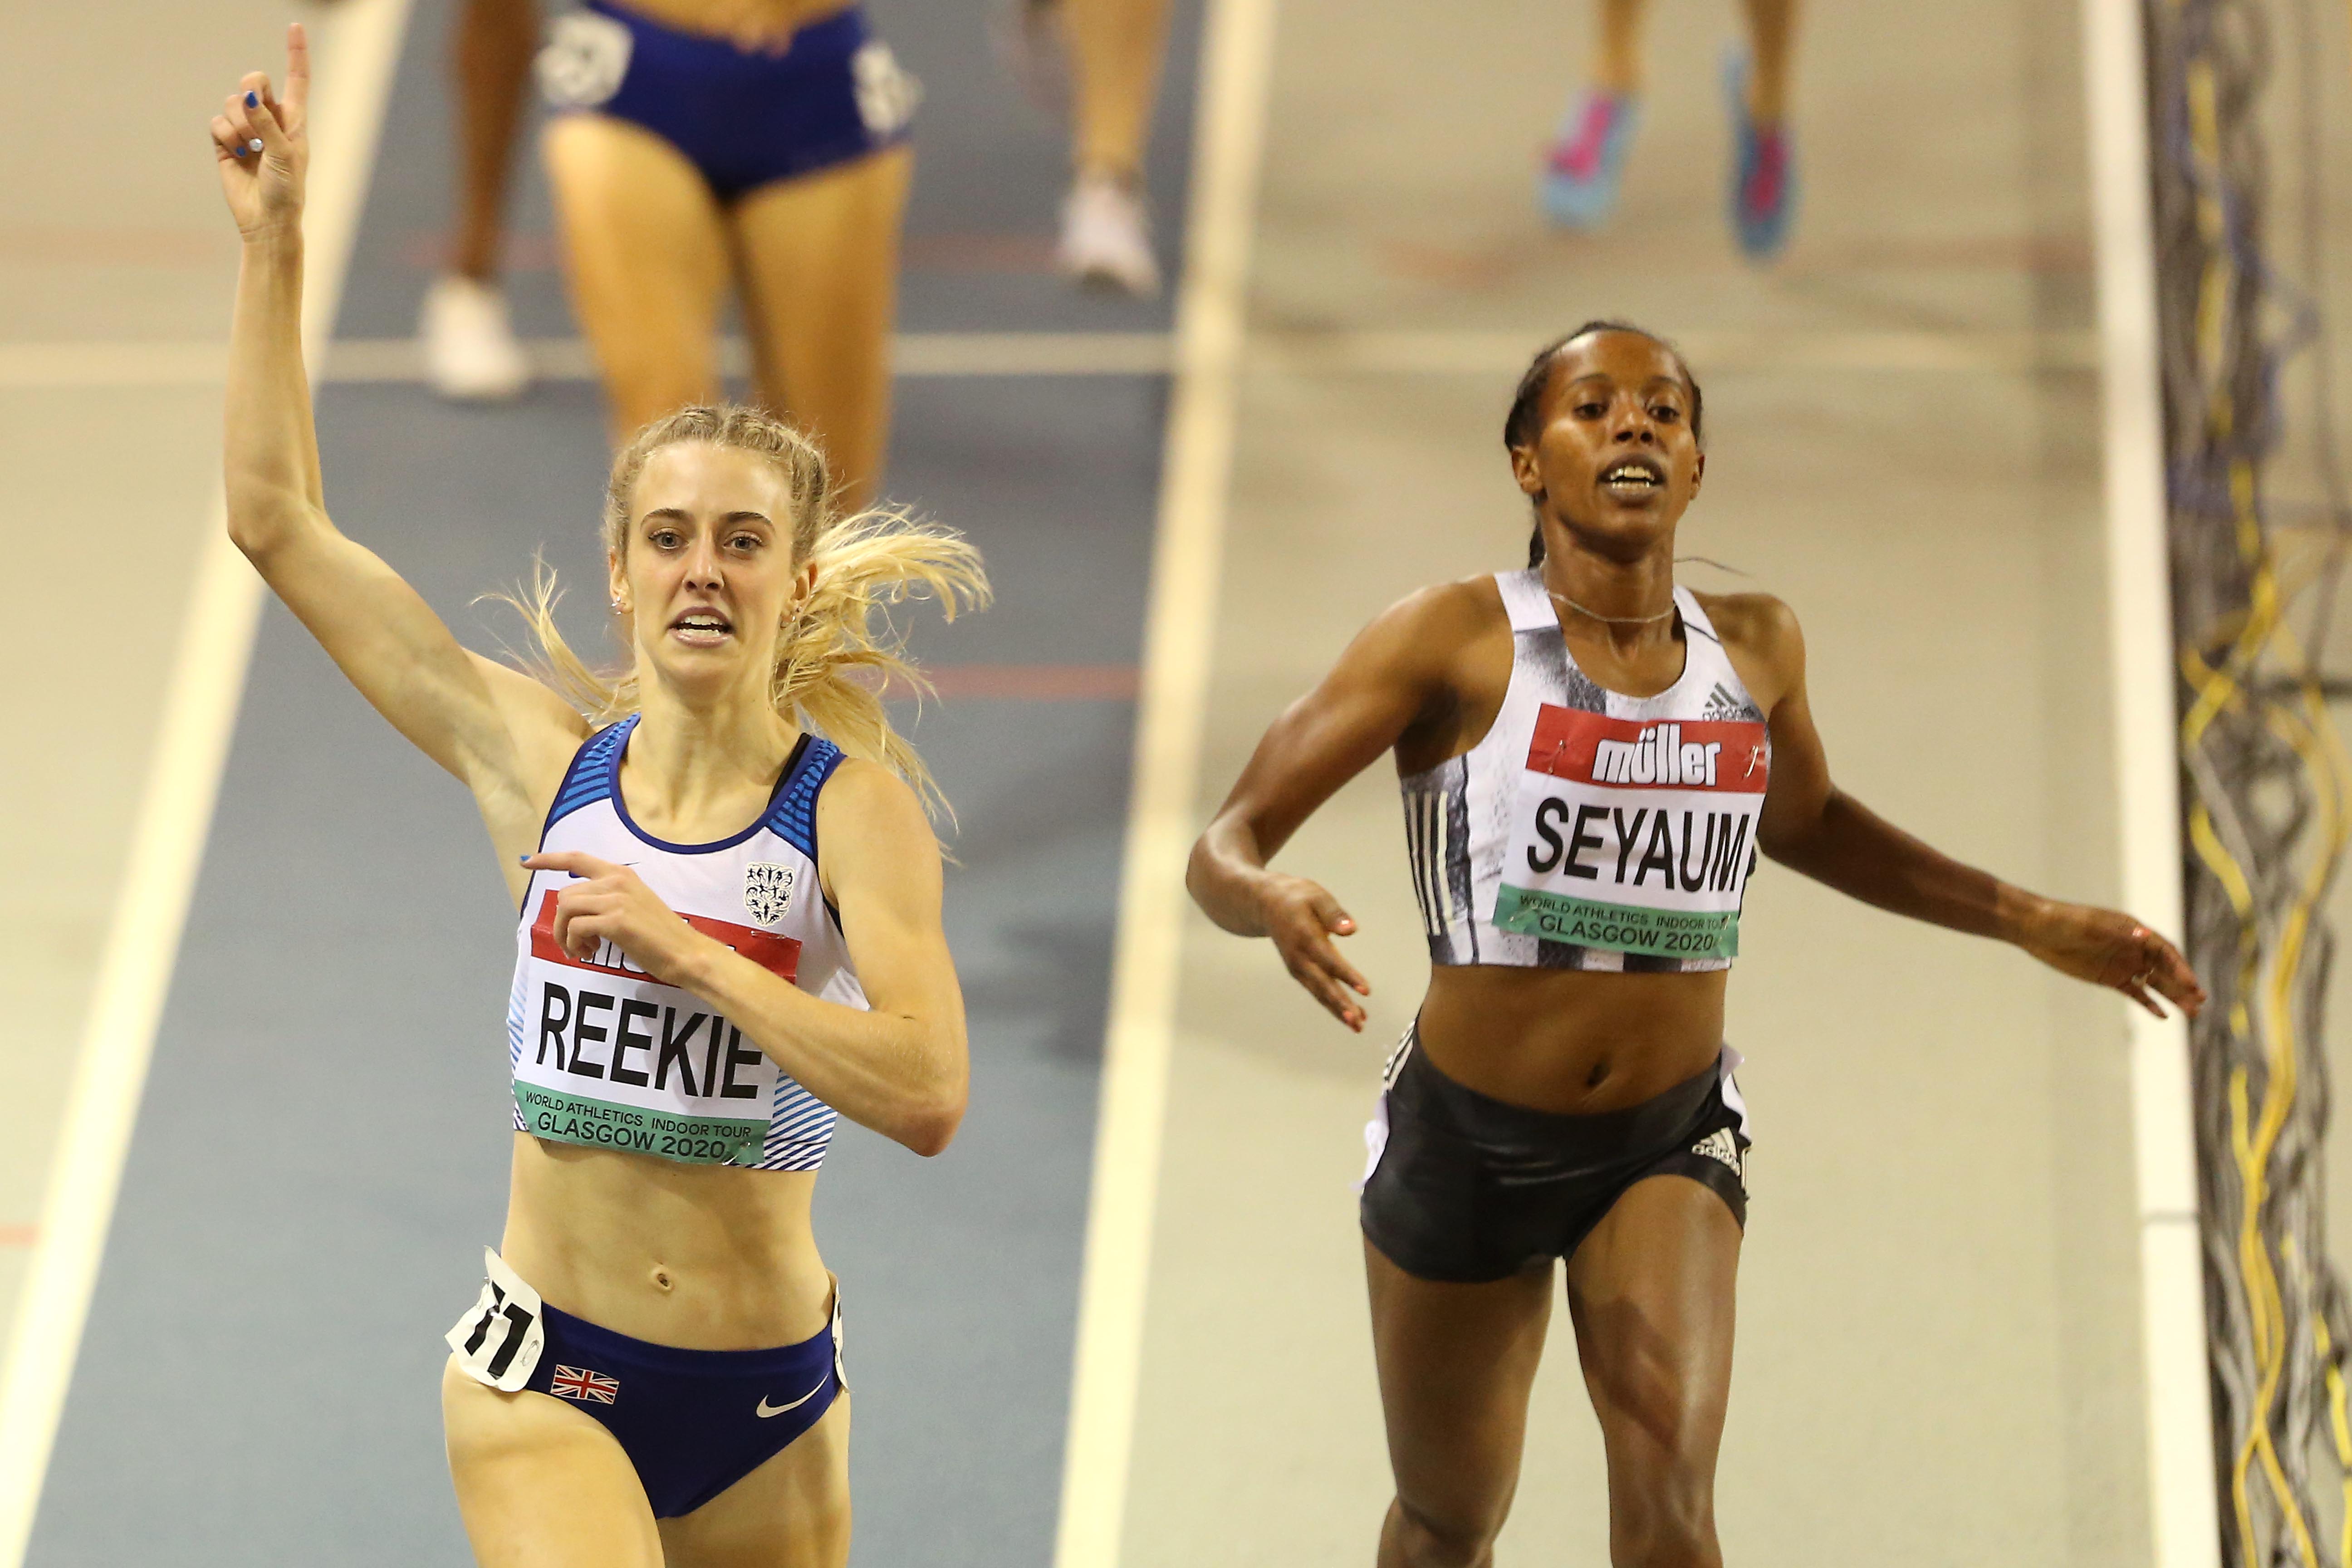 REEKIE AND WIGHTMAN AMONG WINNERS OF THE 2020 BRITISH ATHLETICS WRITERS ASSOCIATION AWARDS